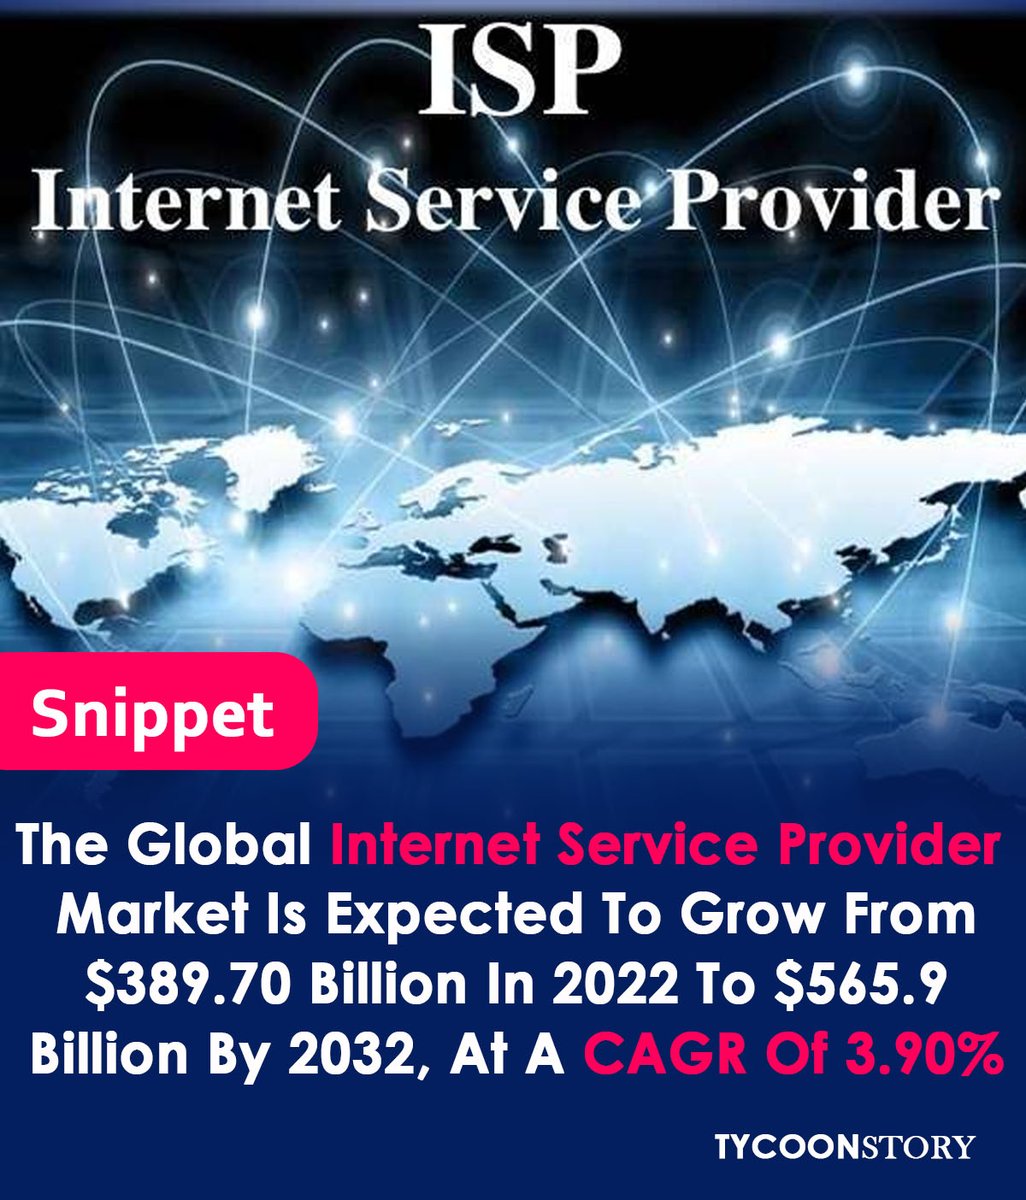 Are You Looking To Start Internet Service Provider Services, Let Review The Below Market Statistics
#Onlinetrading #Corporations #Entertainment #highspeedcables #internettraffic #Entertainment #telecommunications #speeds @AccentureIndia @awscloud @ATT @cisco_in @generalelectric